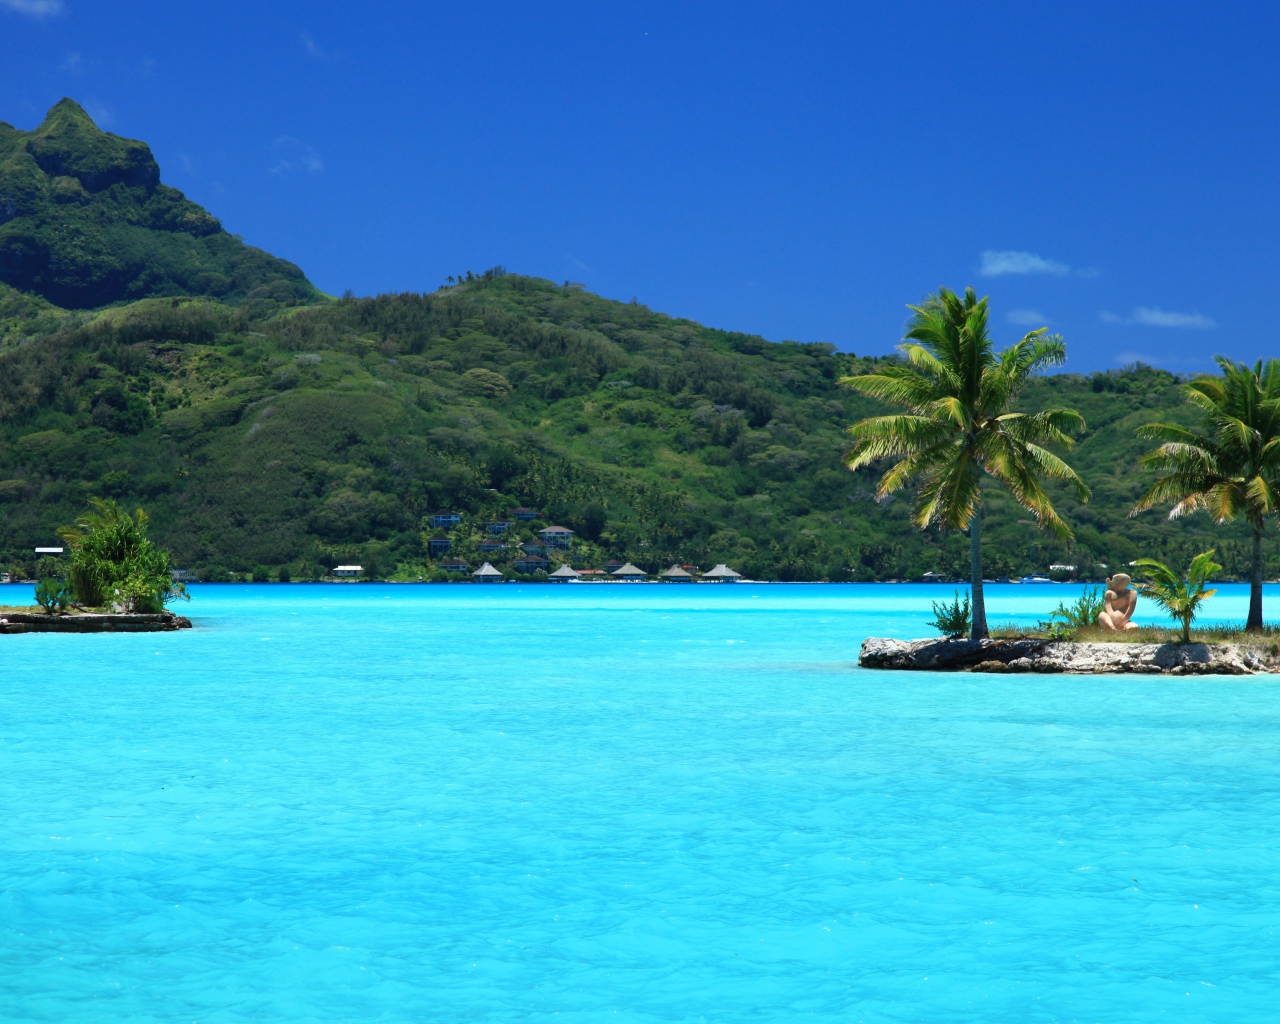 Small islets with palm trees in the blue ocean